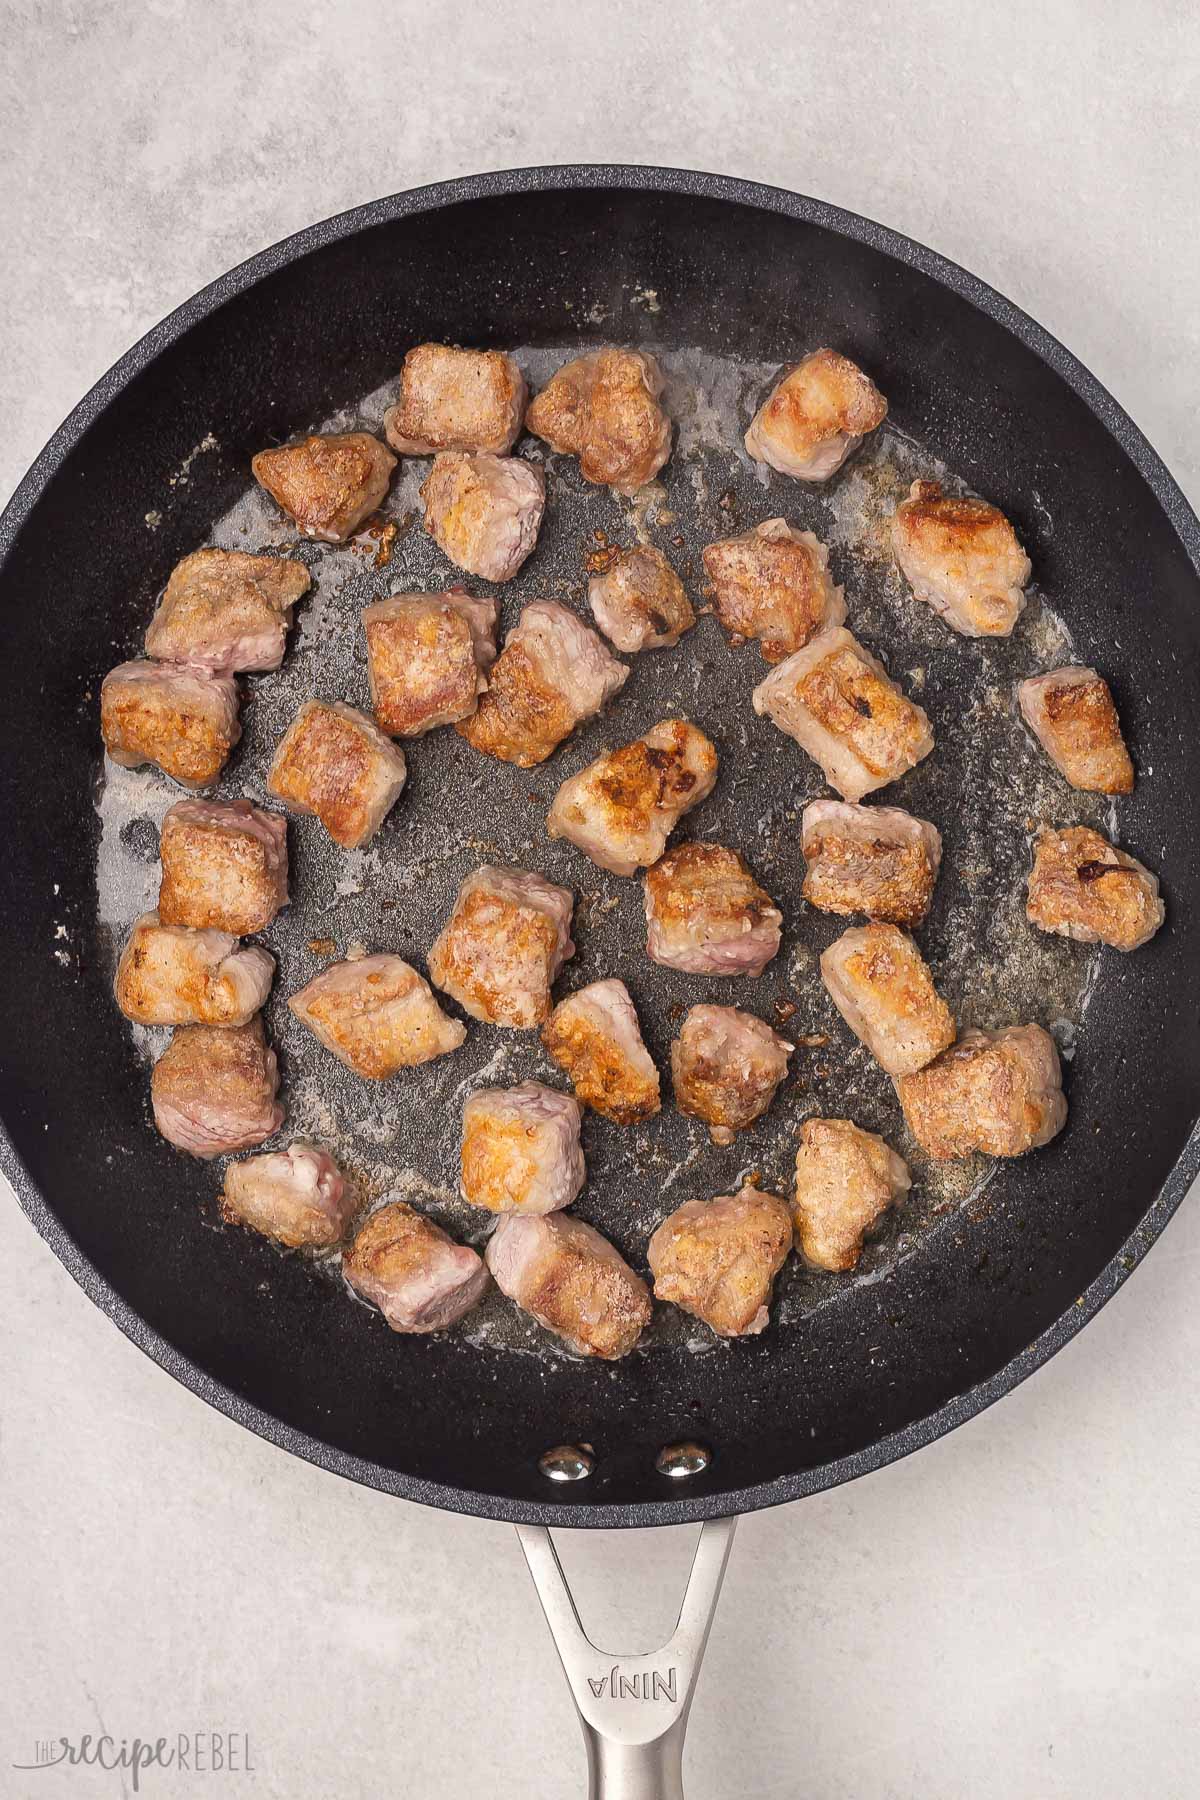 Top view of a black pan with crispy pork being fried in it. 